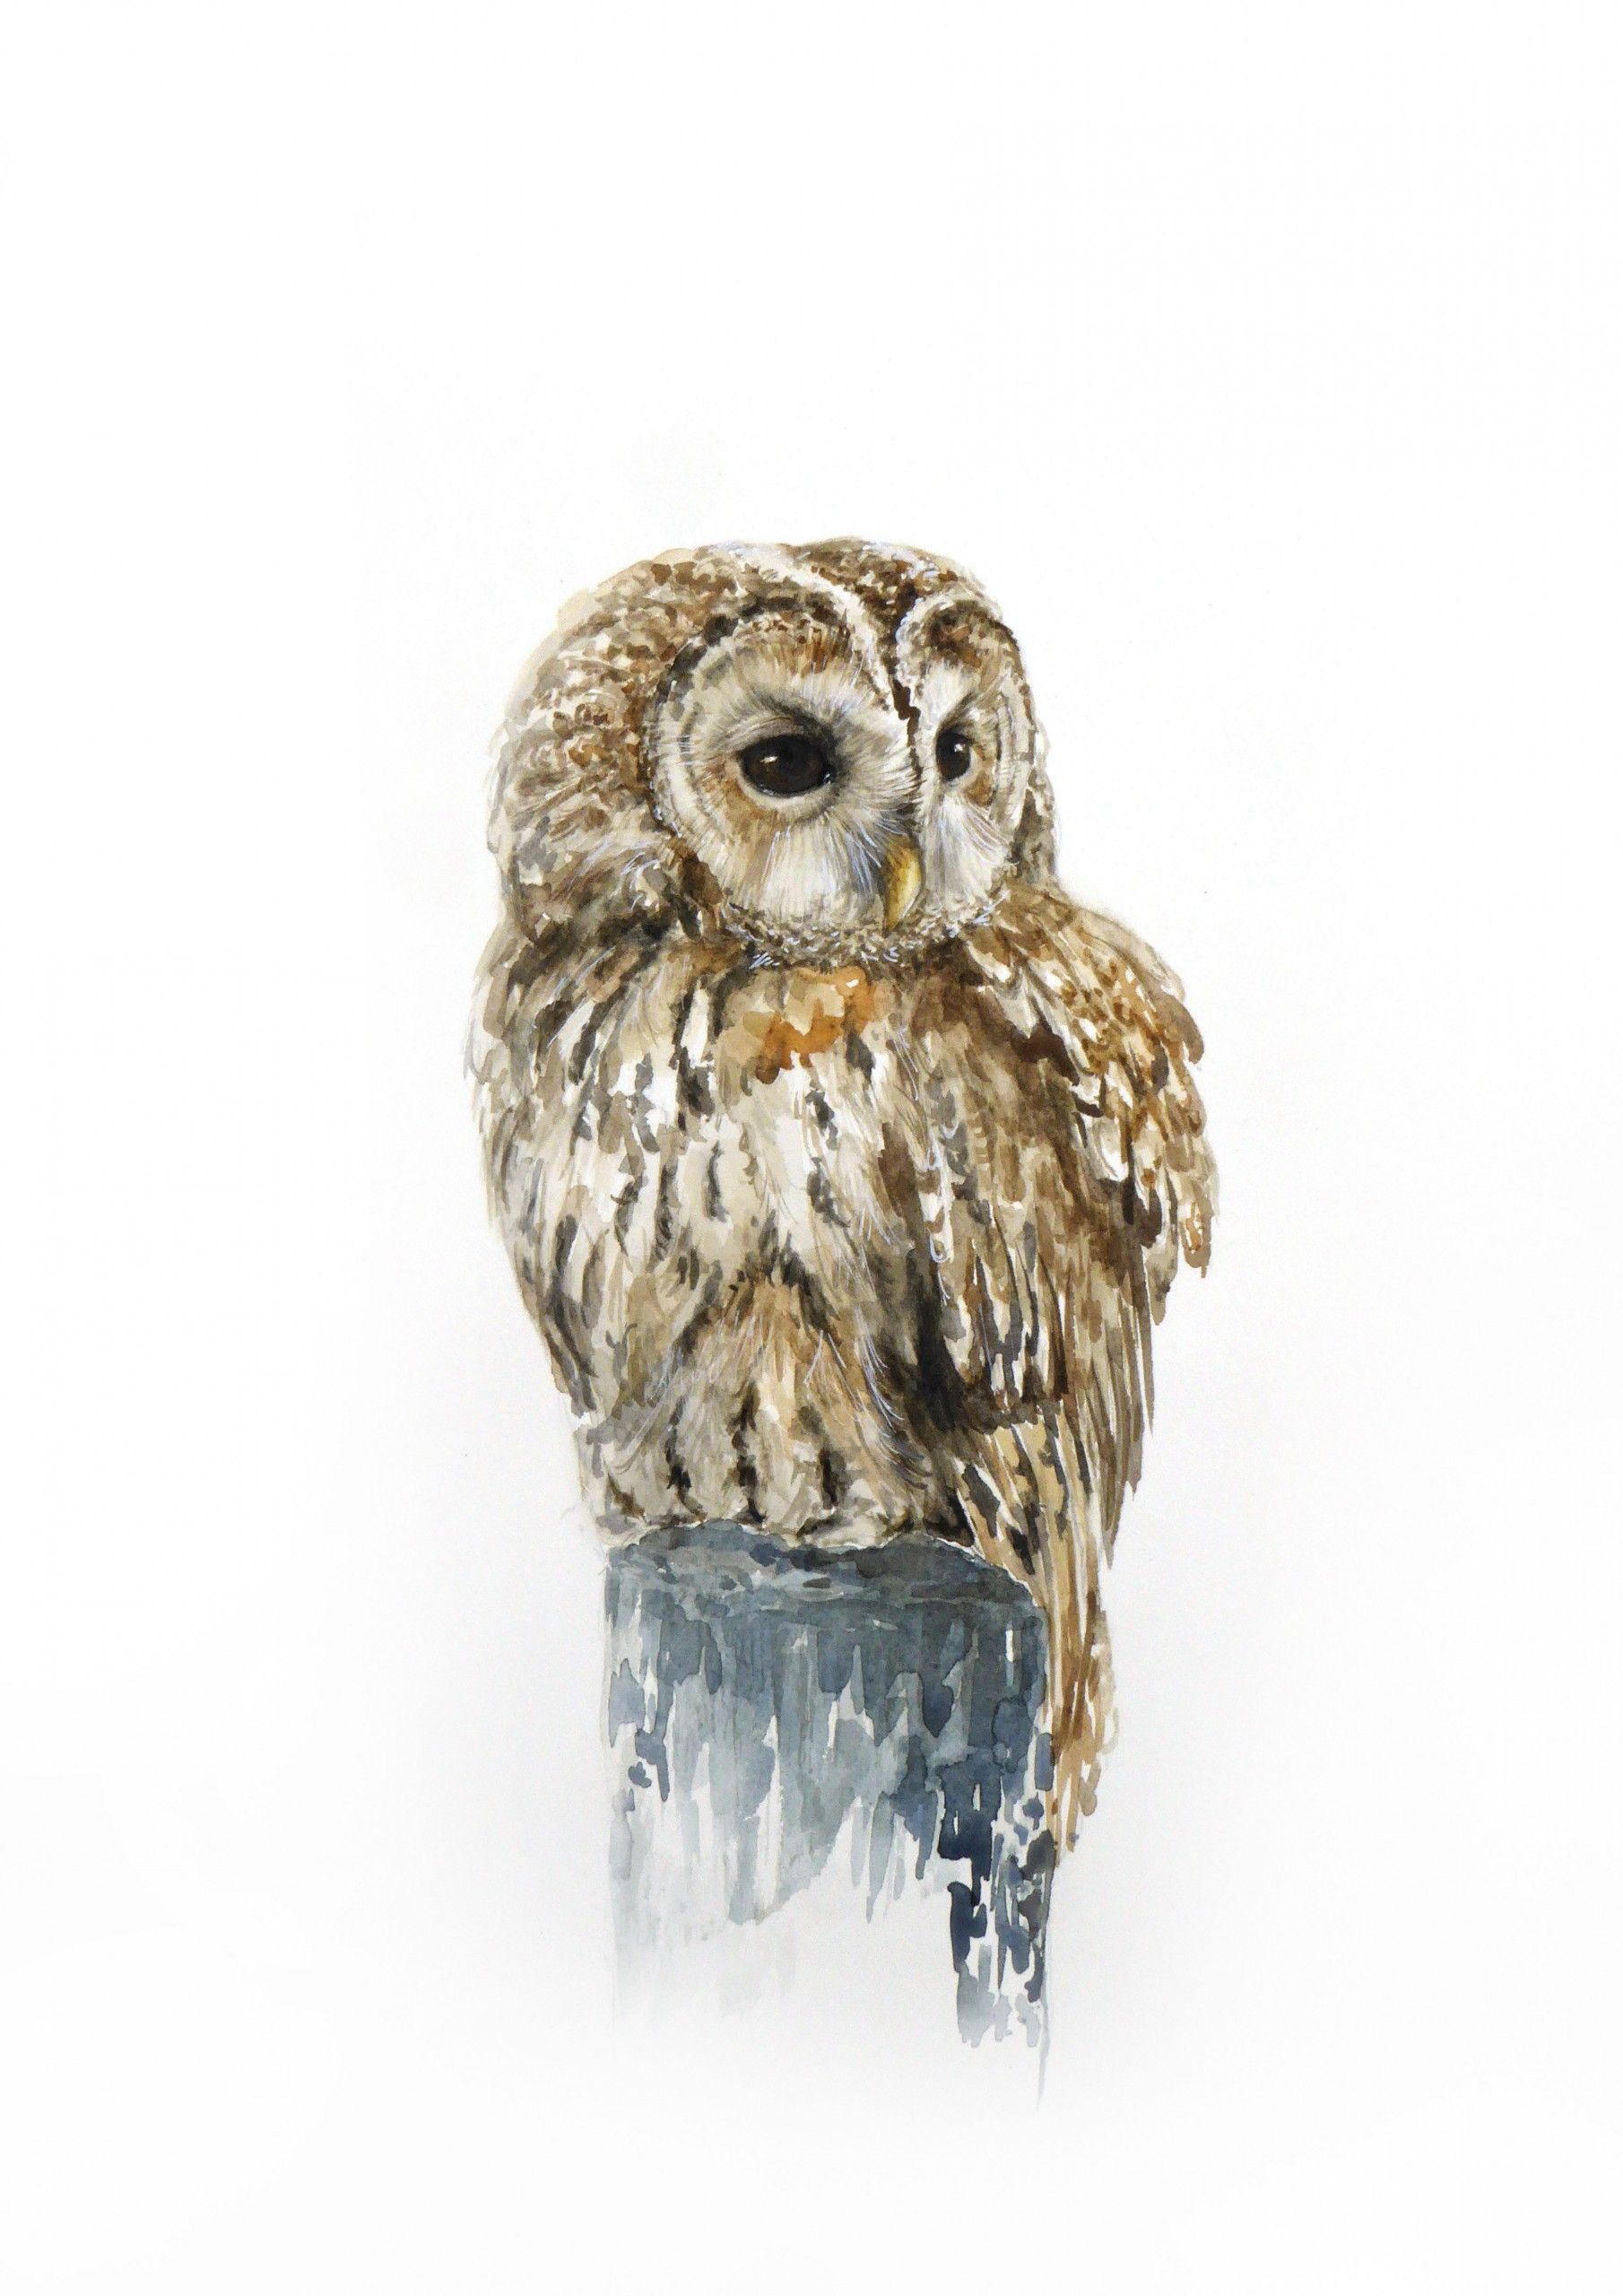 Tawny owl by Annabel Pope